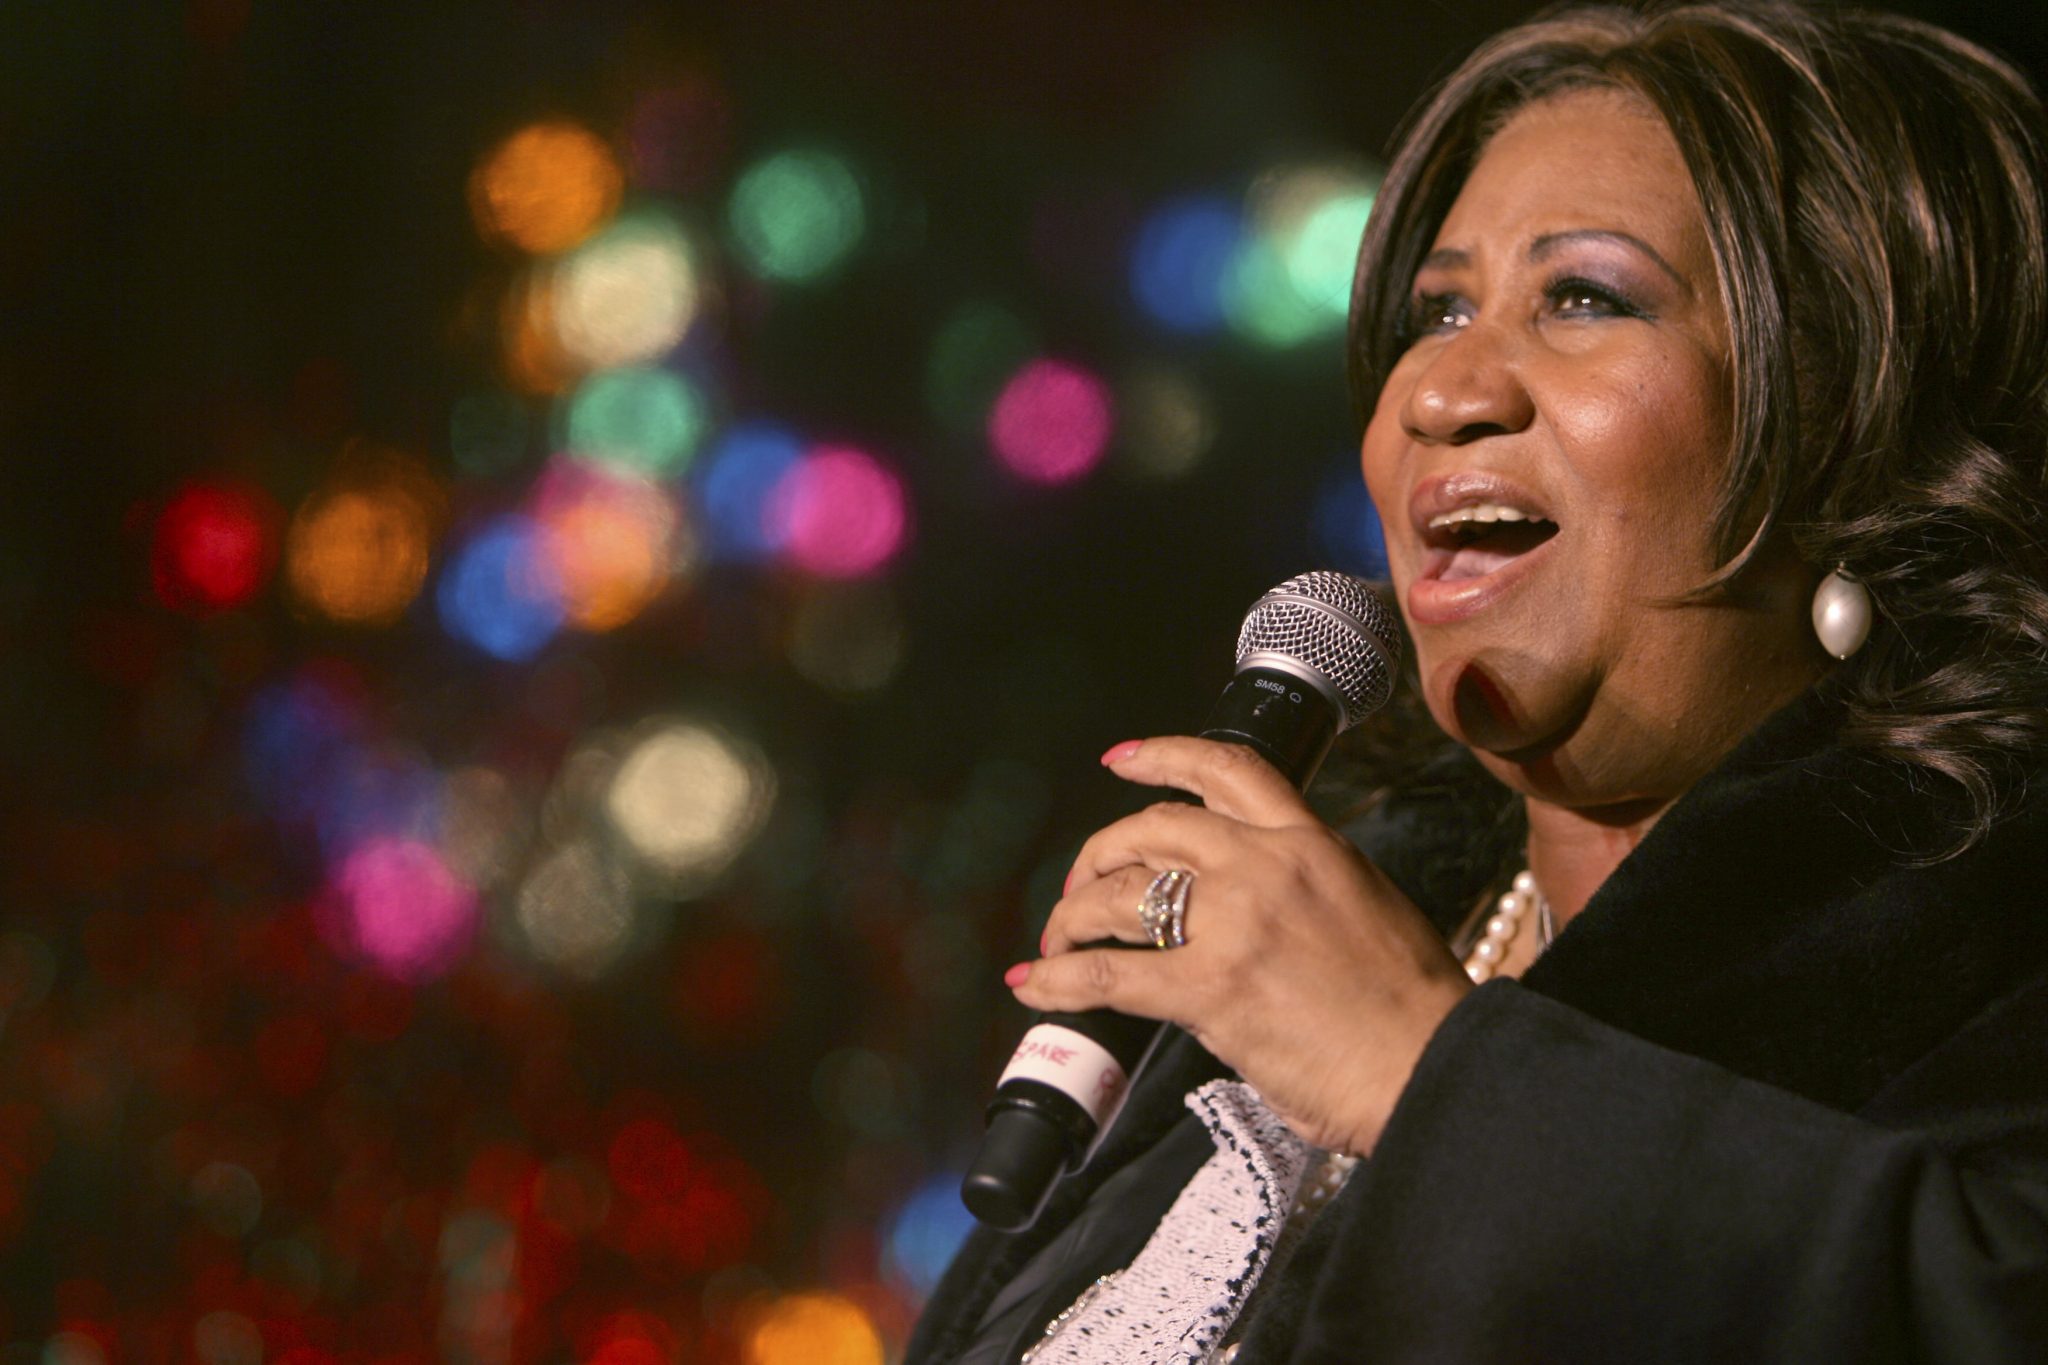 FILE - In this Dec. 4, 2008 file photo, Aretha Franklin performs during the 85th annual Christmas tree lighting at the New York Stock Exchange in New York.